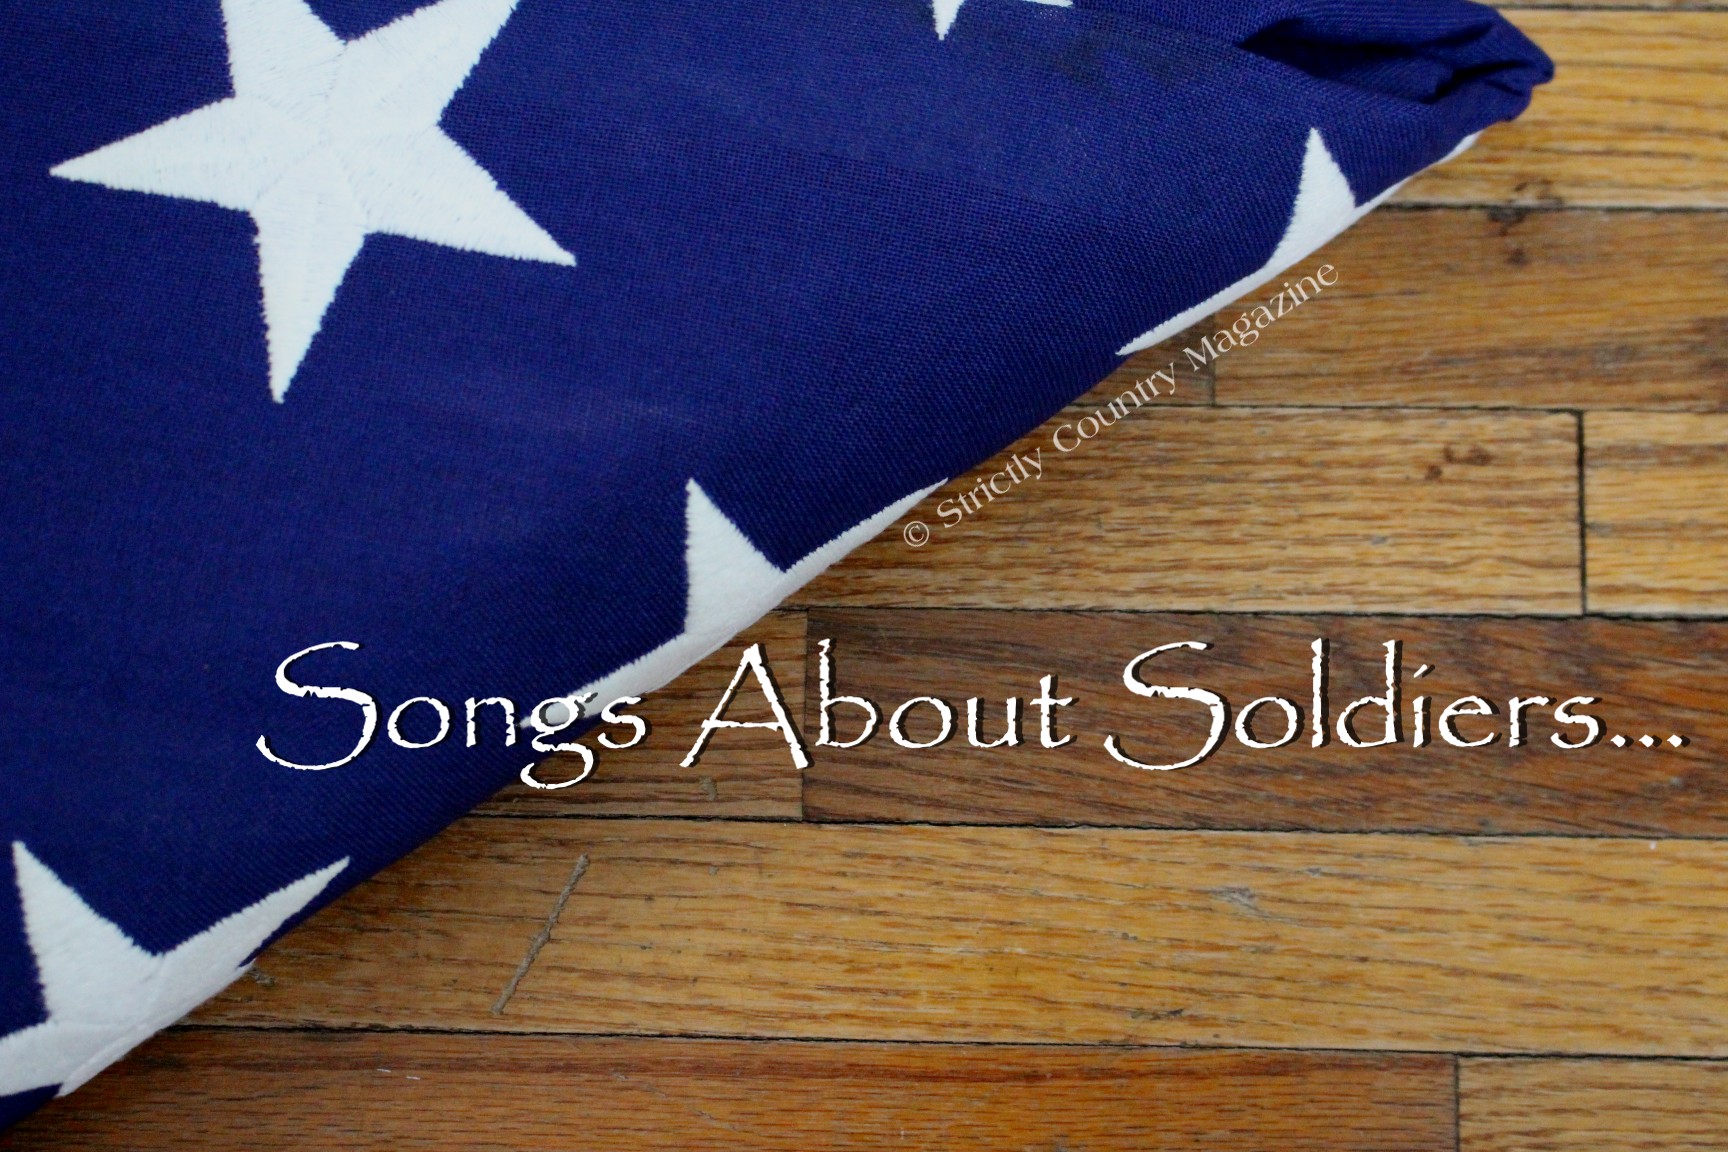 Strictly Country Magazine copyright Songs About Soldiers headline